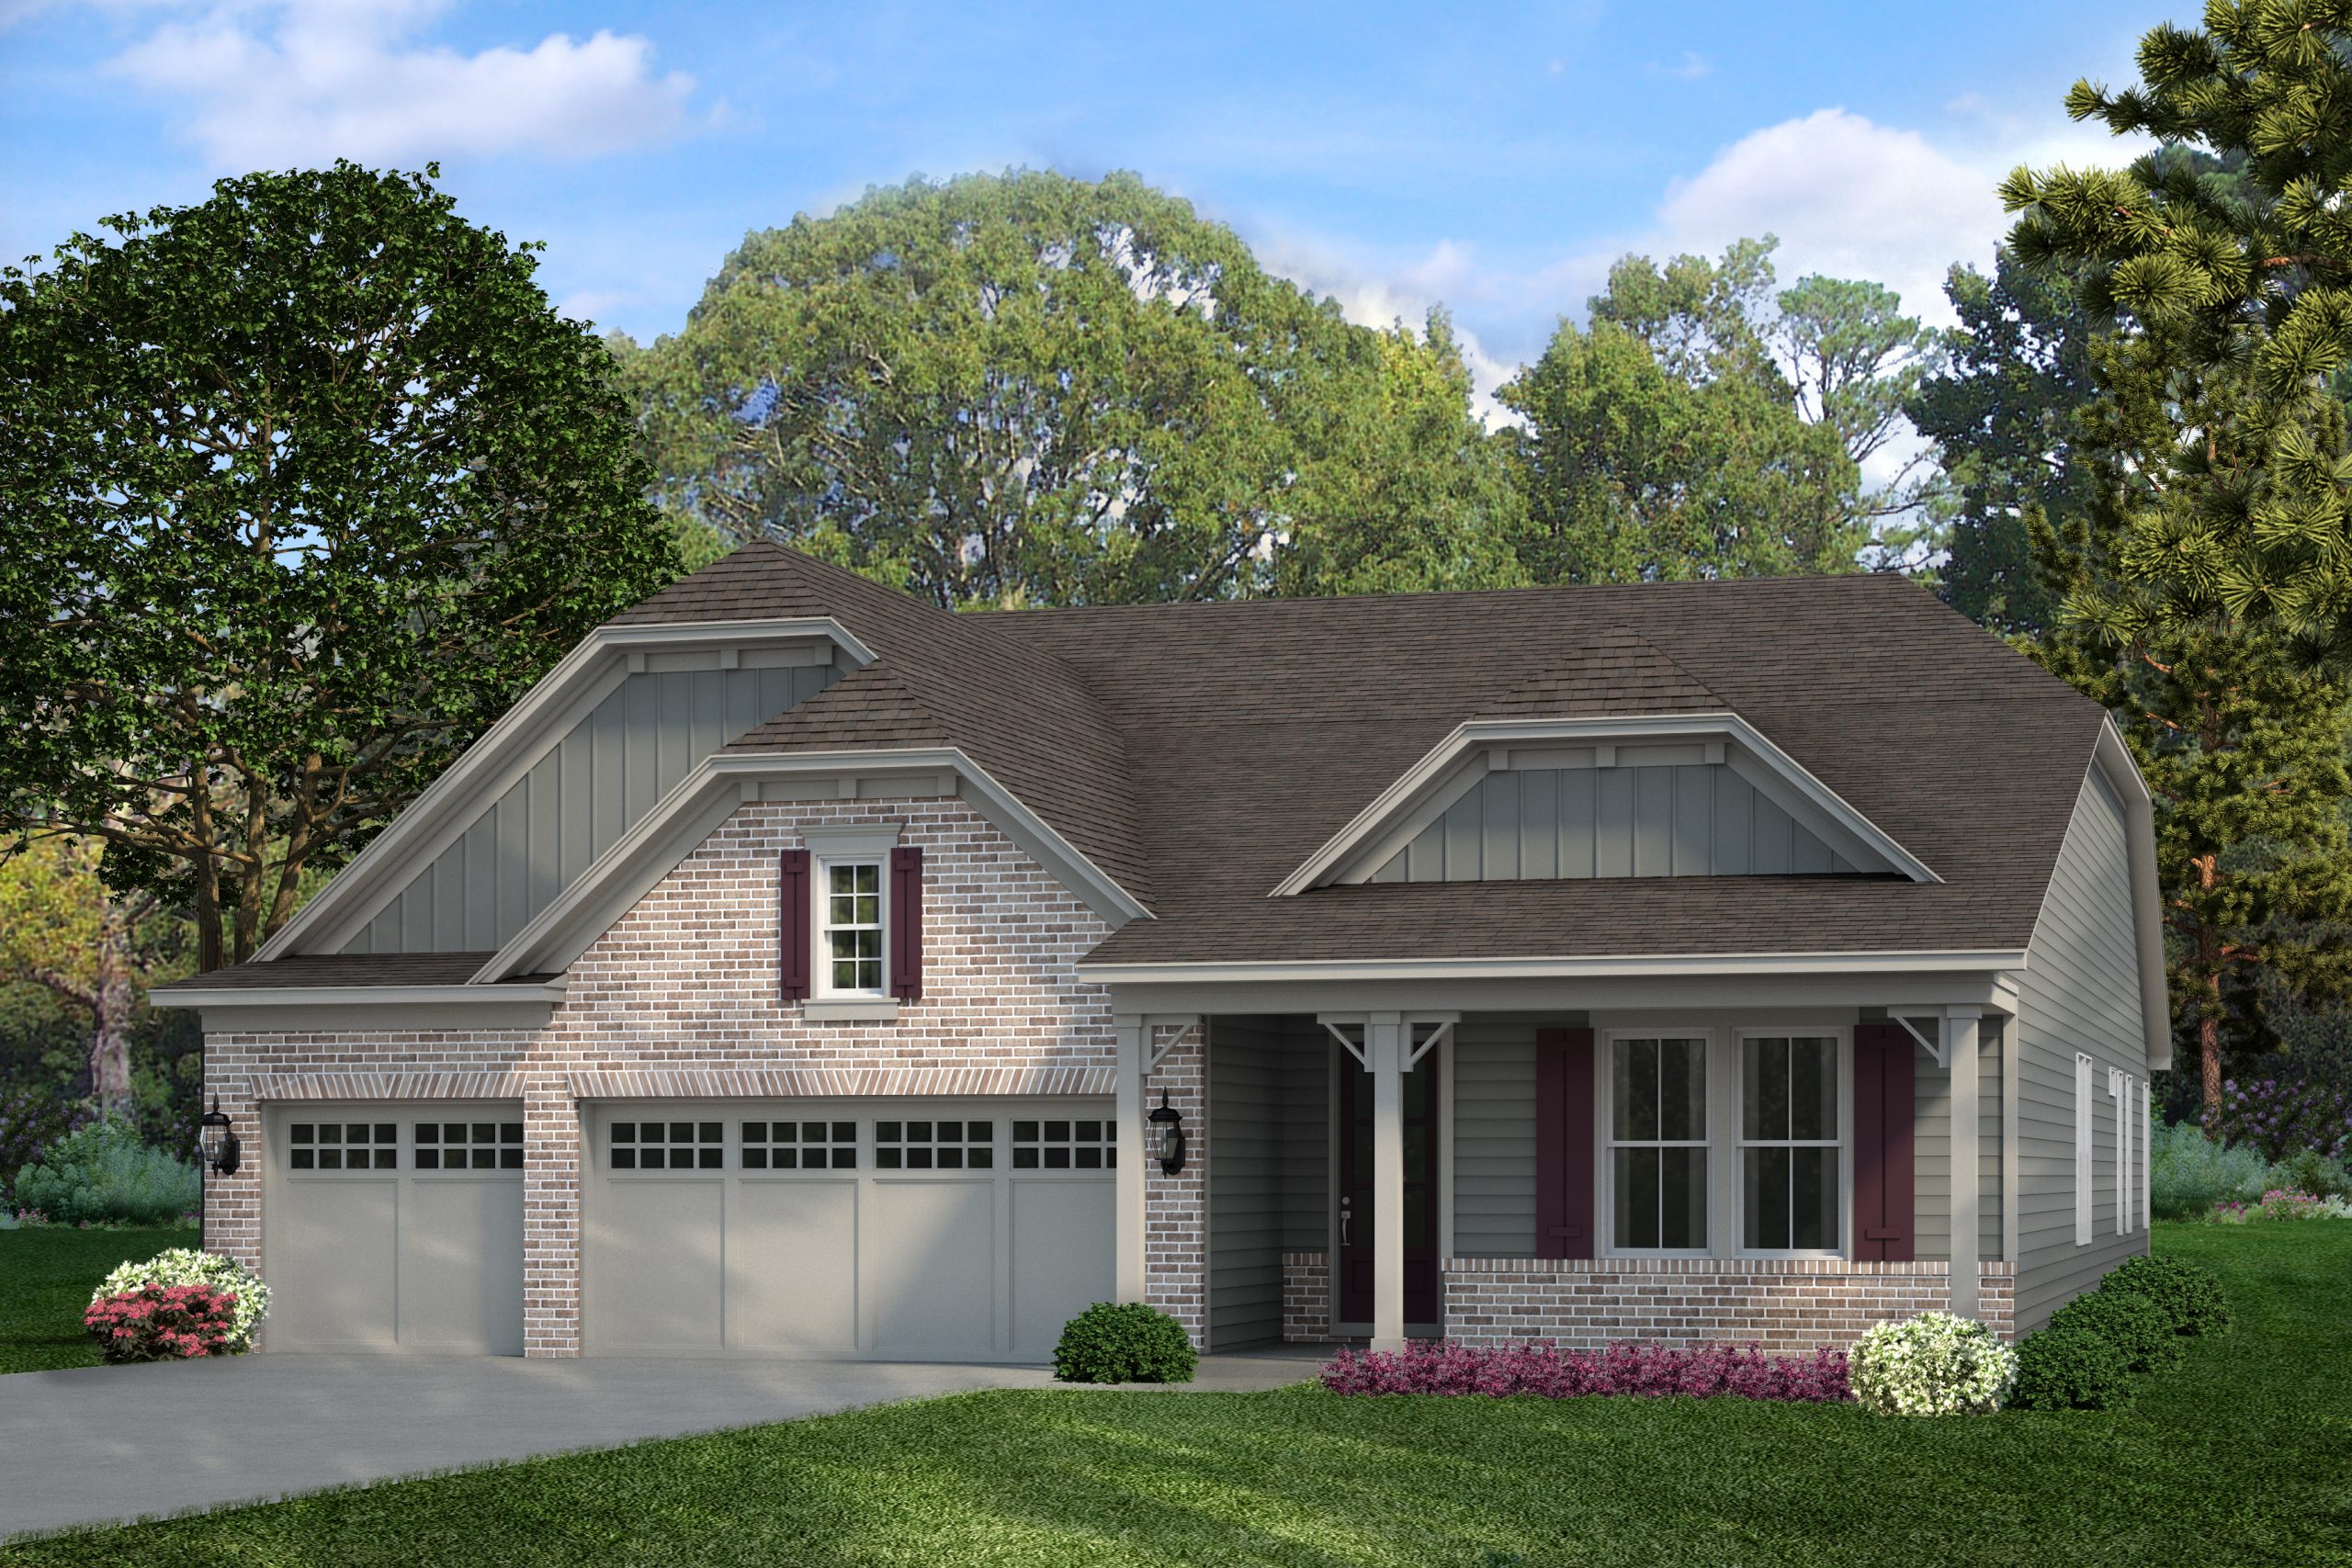 Kolter to Debut New Designs at New Active Adult Hoschton Community